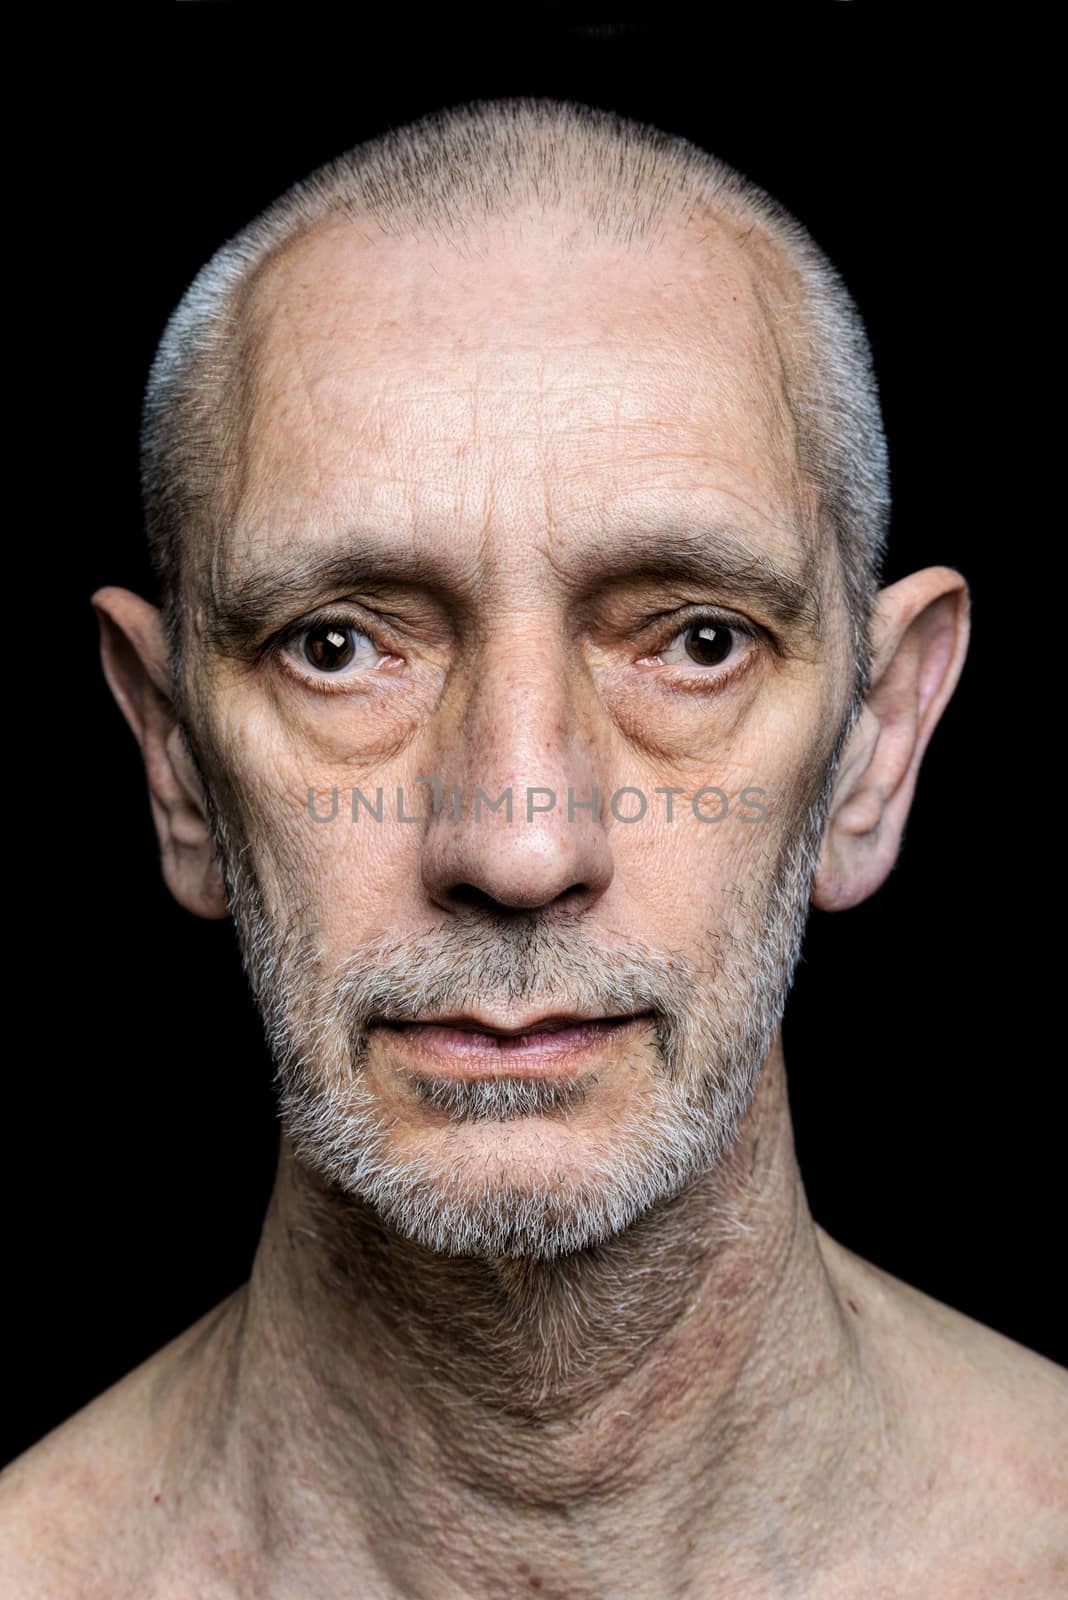 Dramatic color portrait of an adult man with sad expression on black background